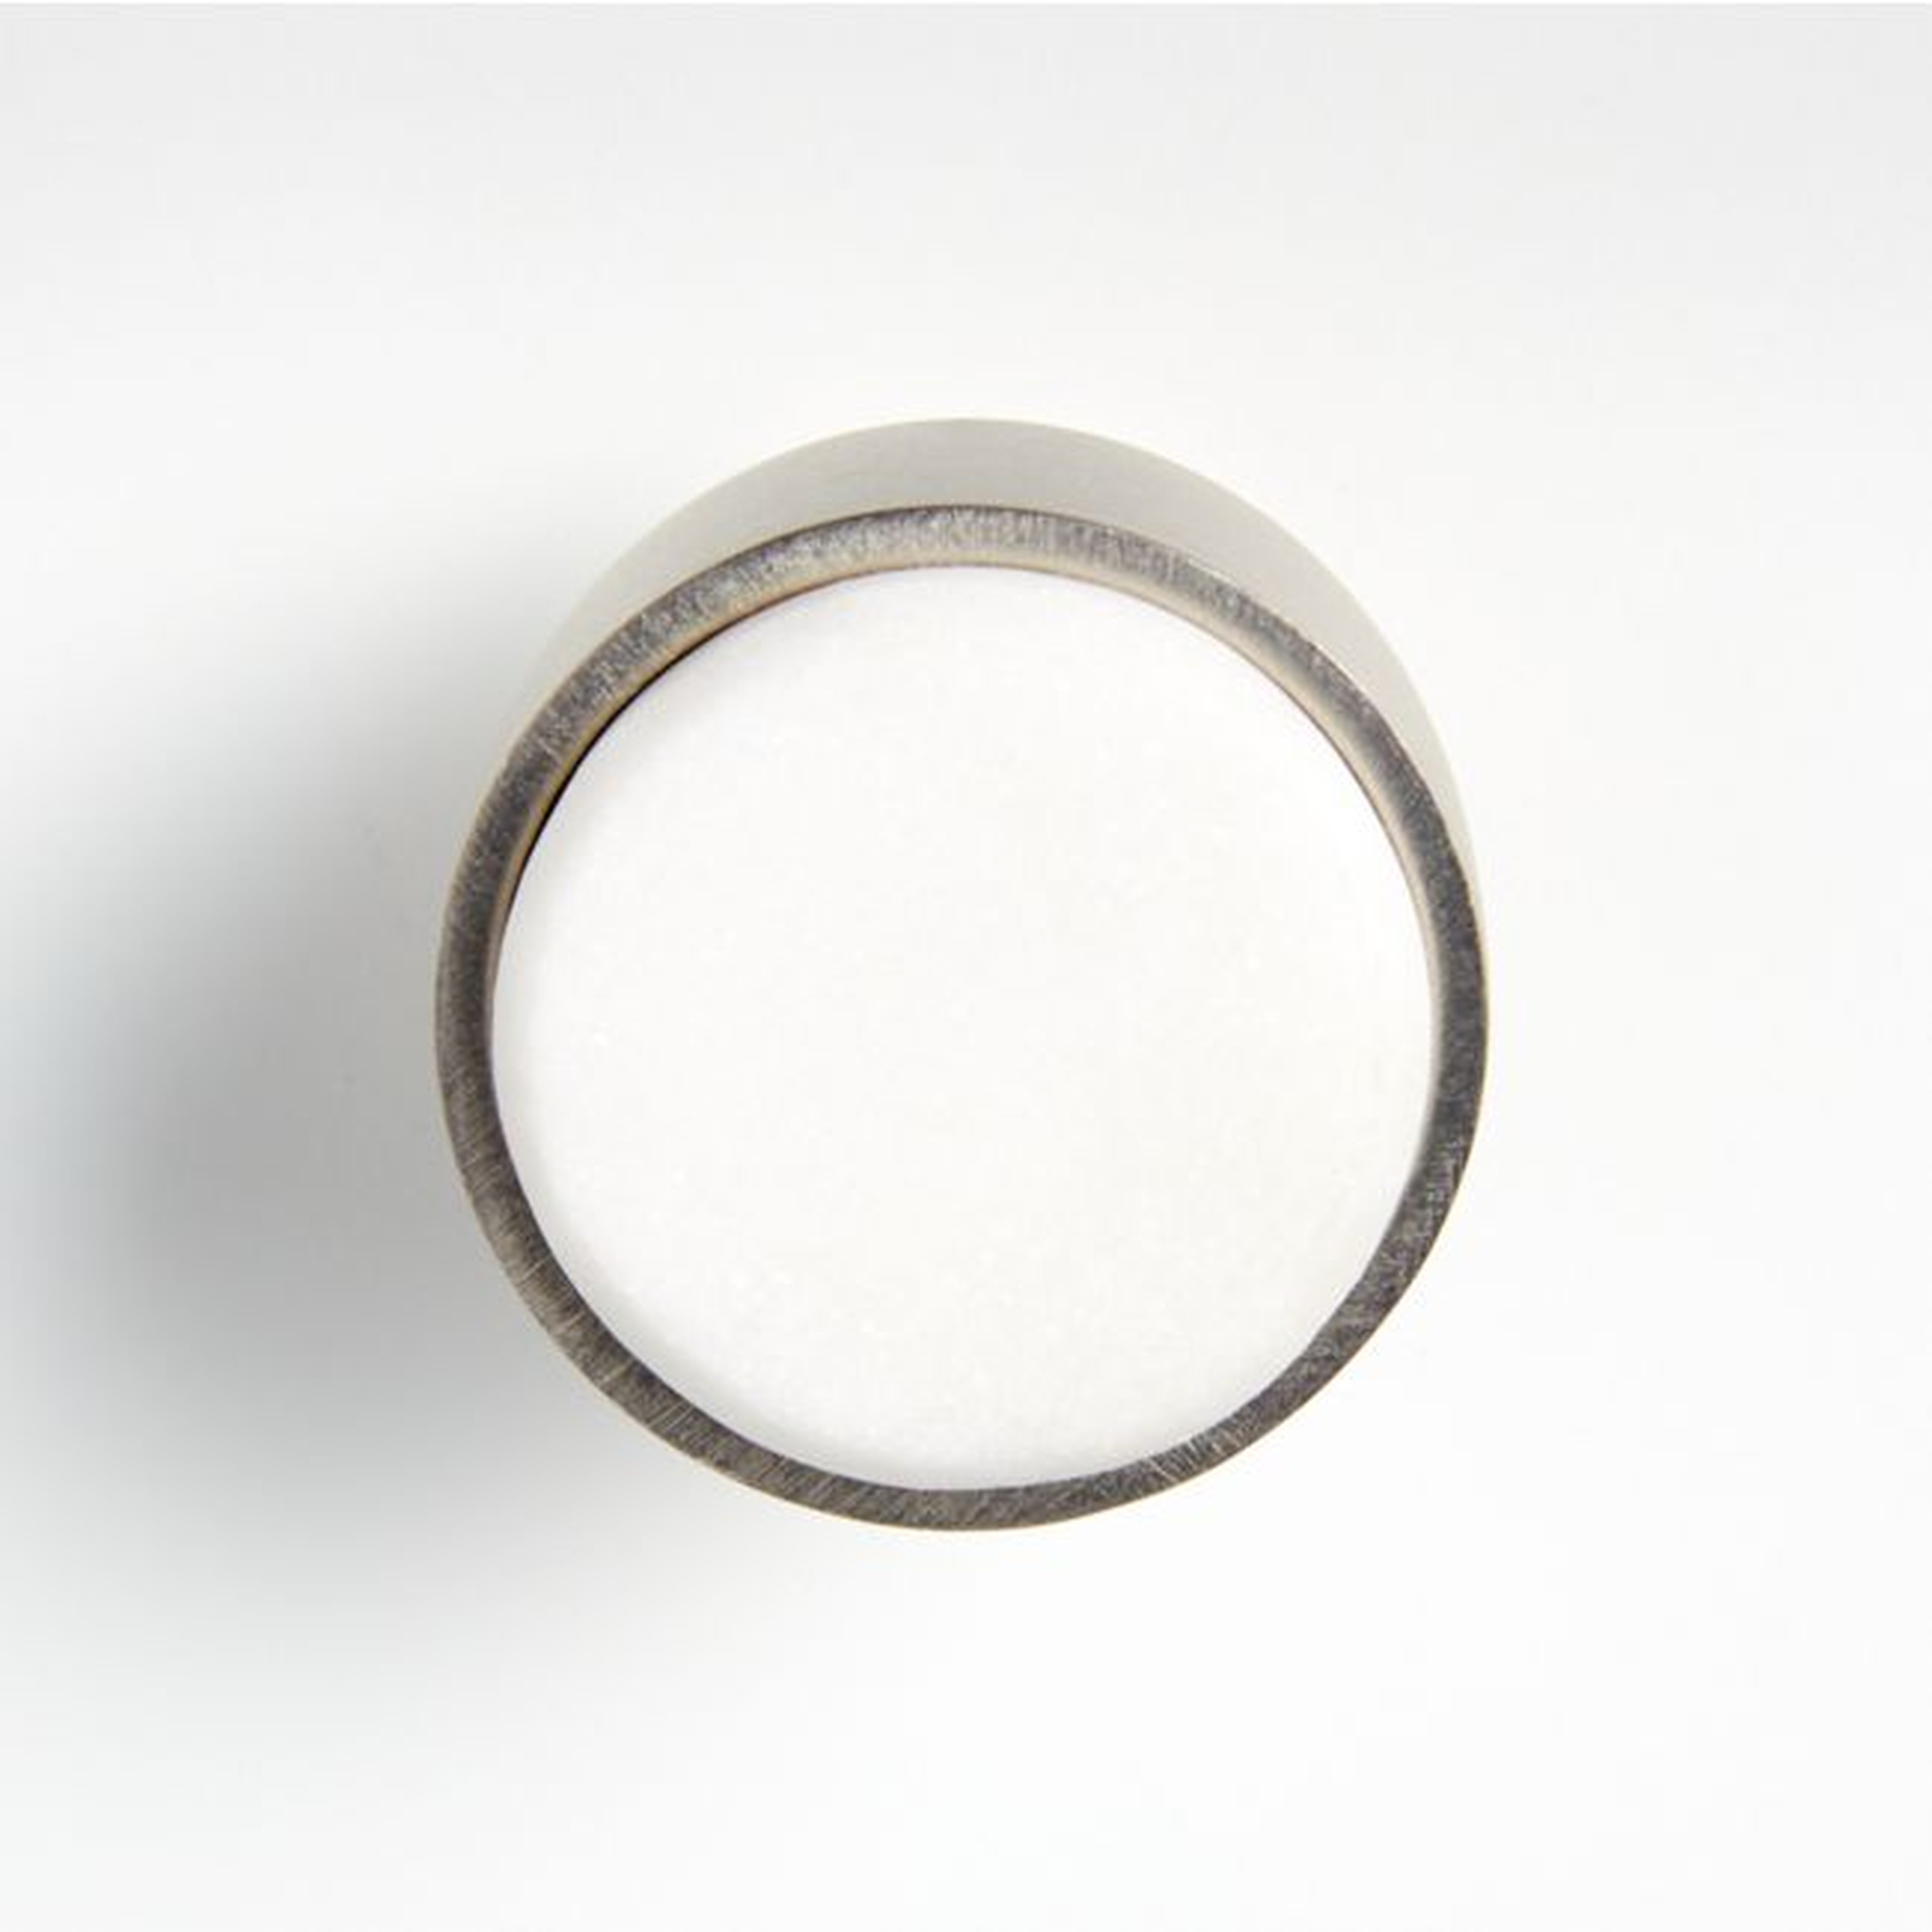 Marble Inlay Brushed Nickel Knob - Crate and Barrel